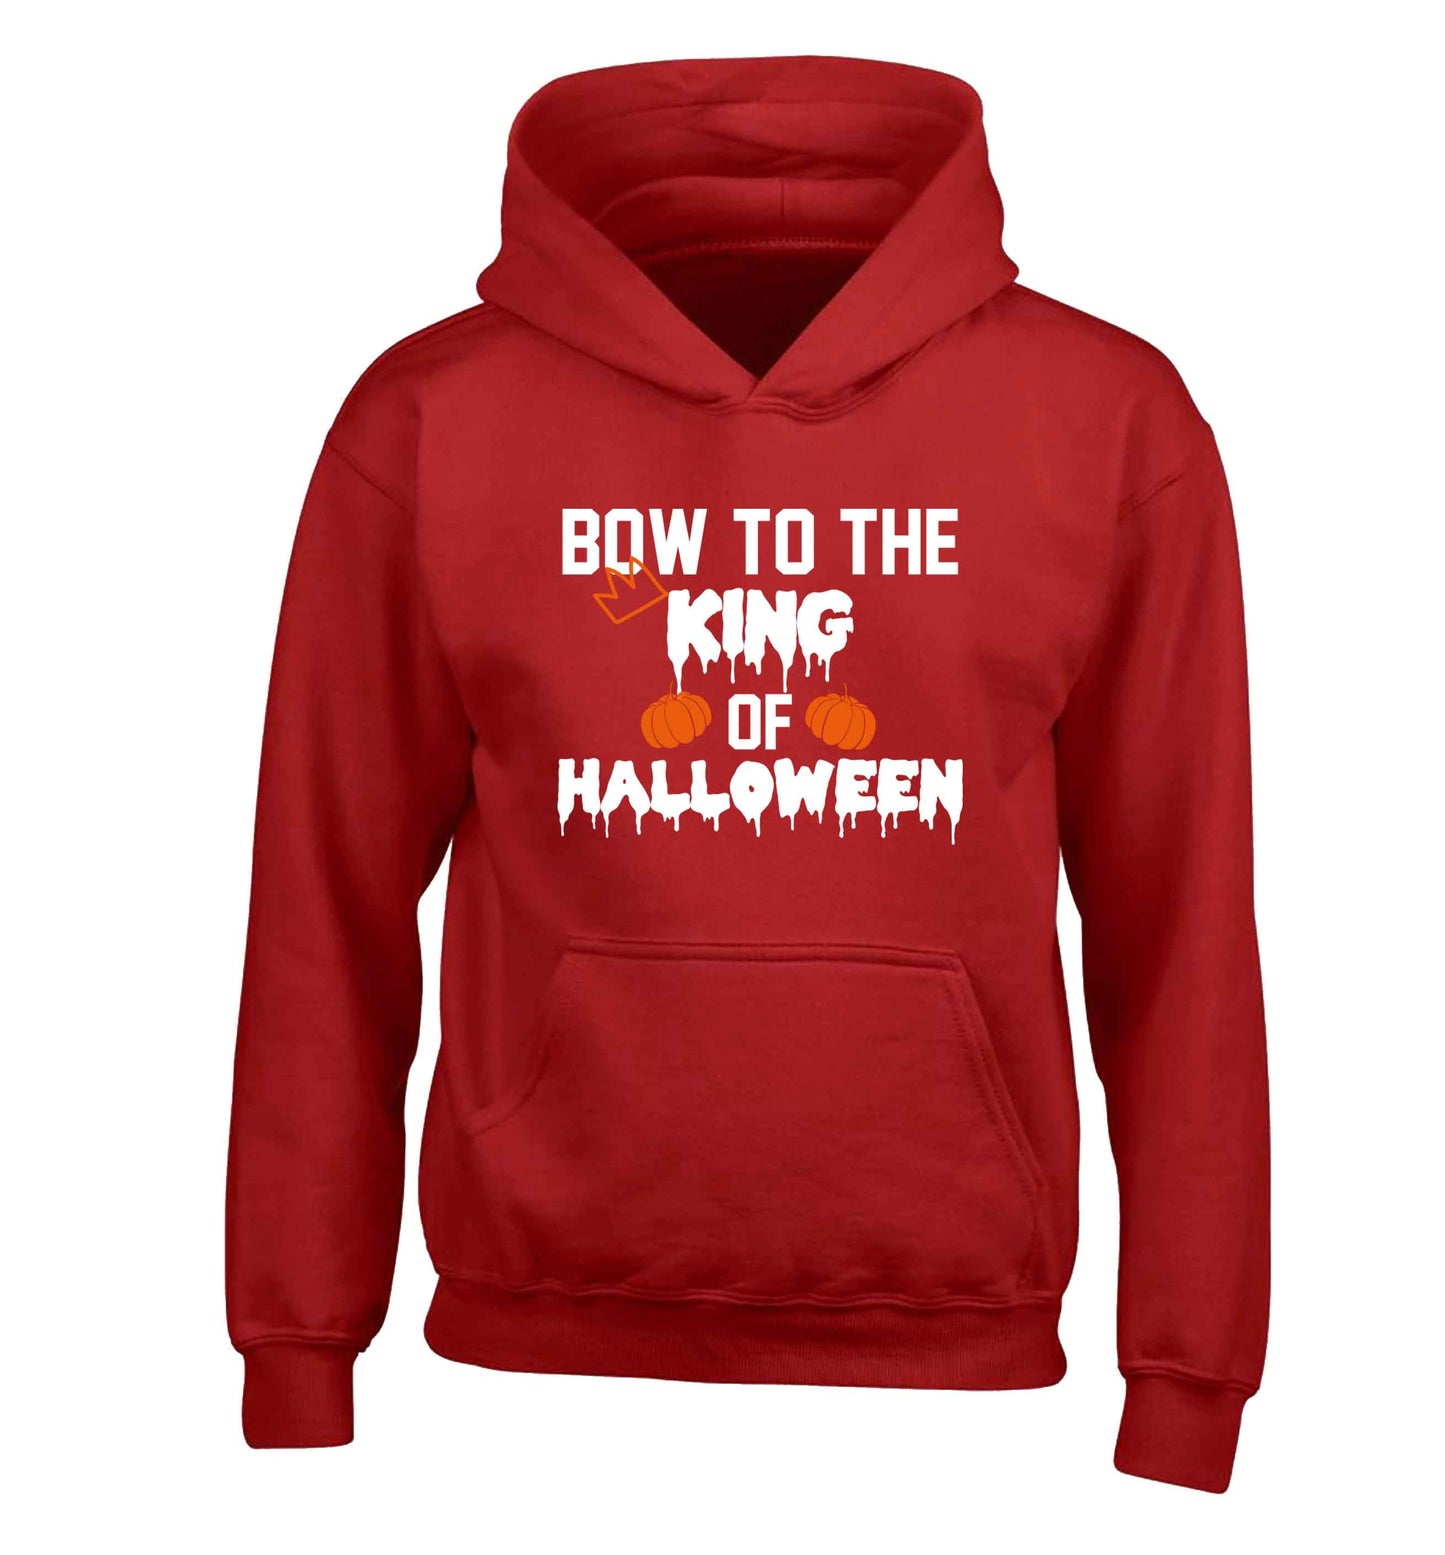 Bow to the King of halloween children's red hoodie 12-13 Years